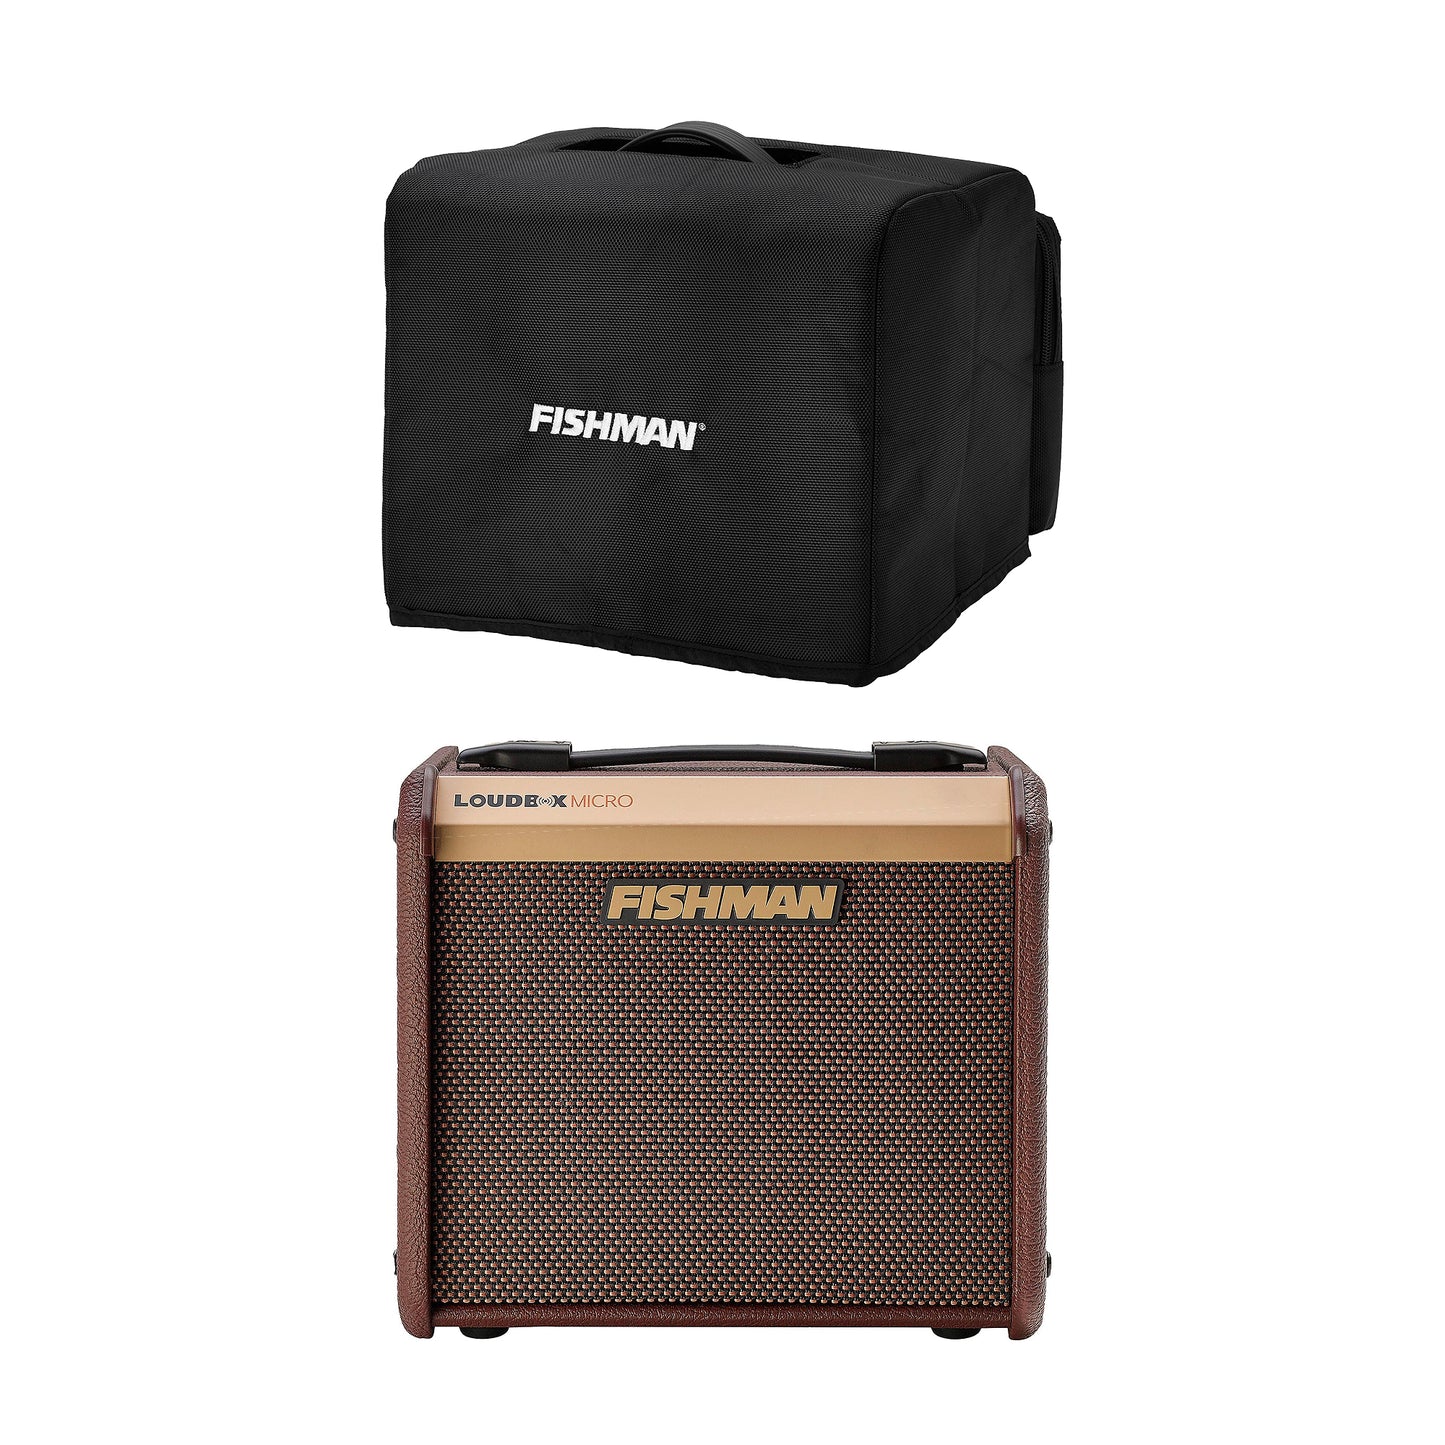 Fishman Loudbox Micro 40w Acoustic Instrument Amp and Micro Padded Cover Bundle